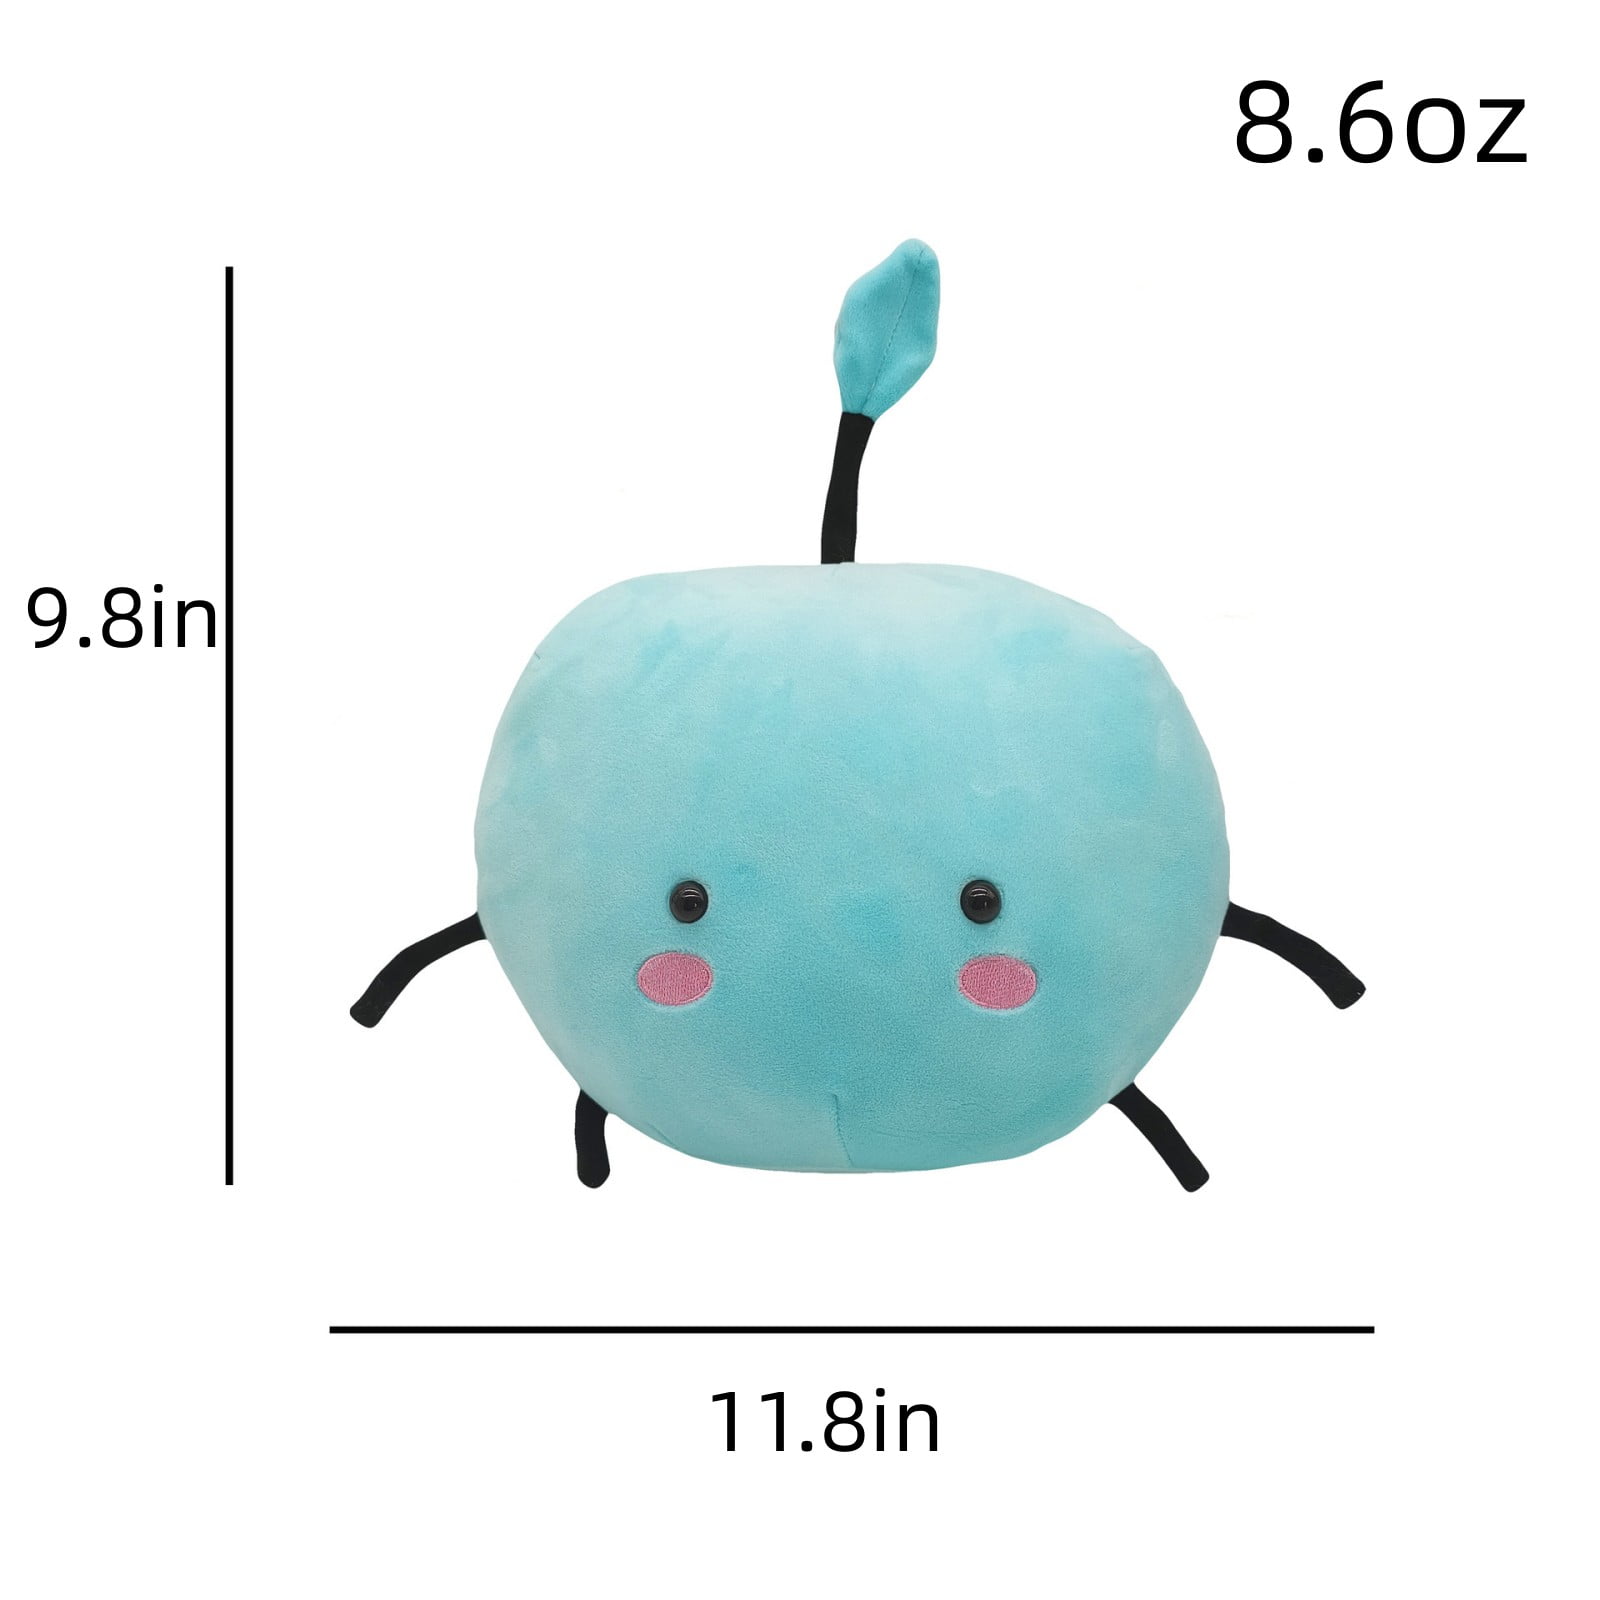 Stardew Plush Cute Valley Apple Stuffed Plush Toy, 9.8 Inch Cartoon Apple  Design Fruit Animation Games Figure Soft Stuffed Throw Pillow Doll, Gift  for